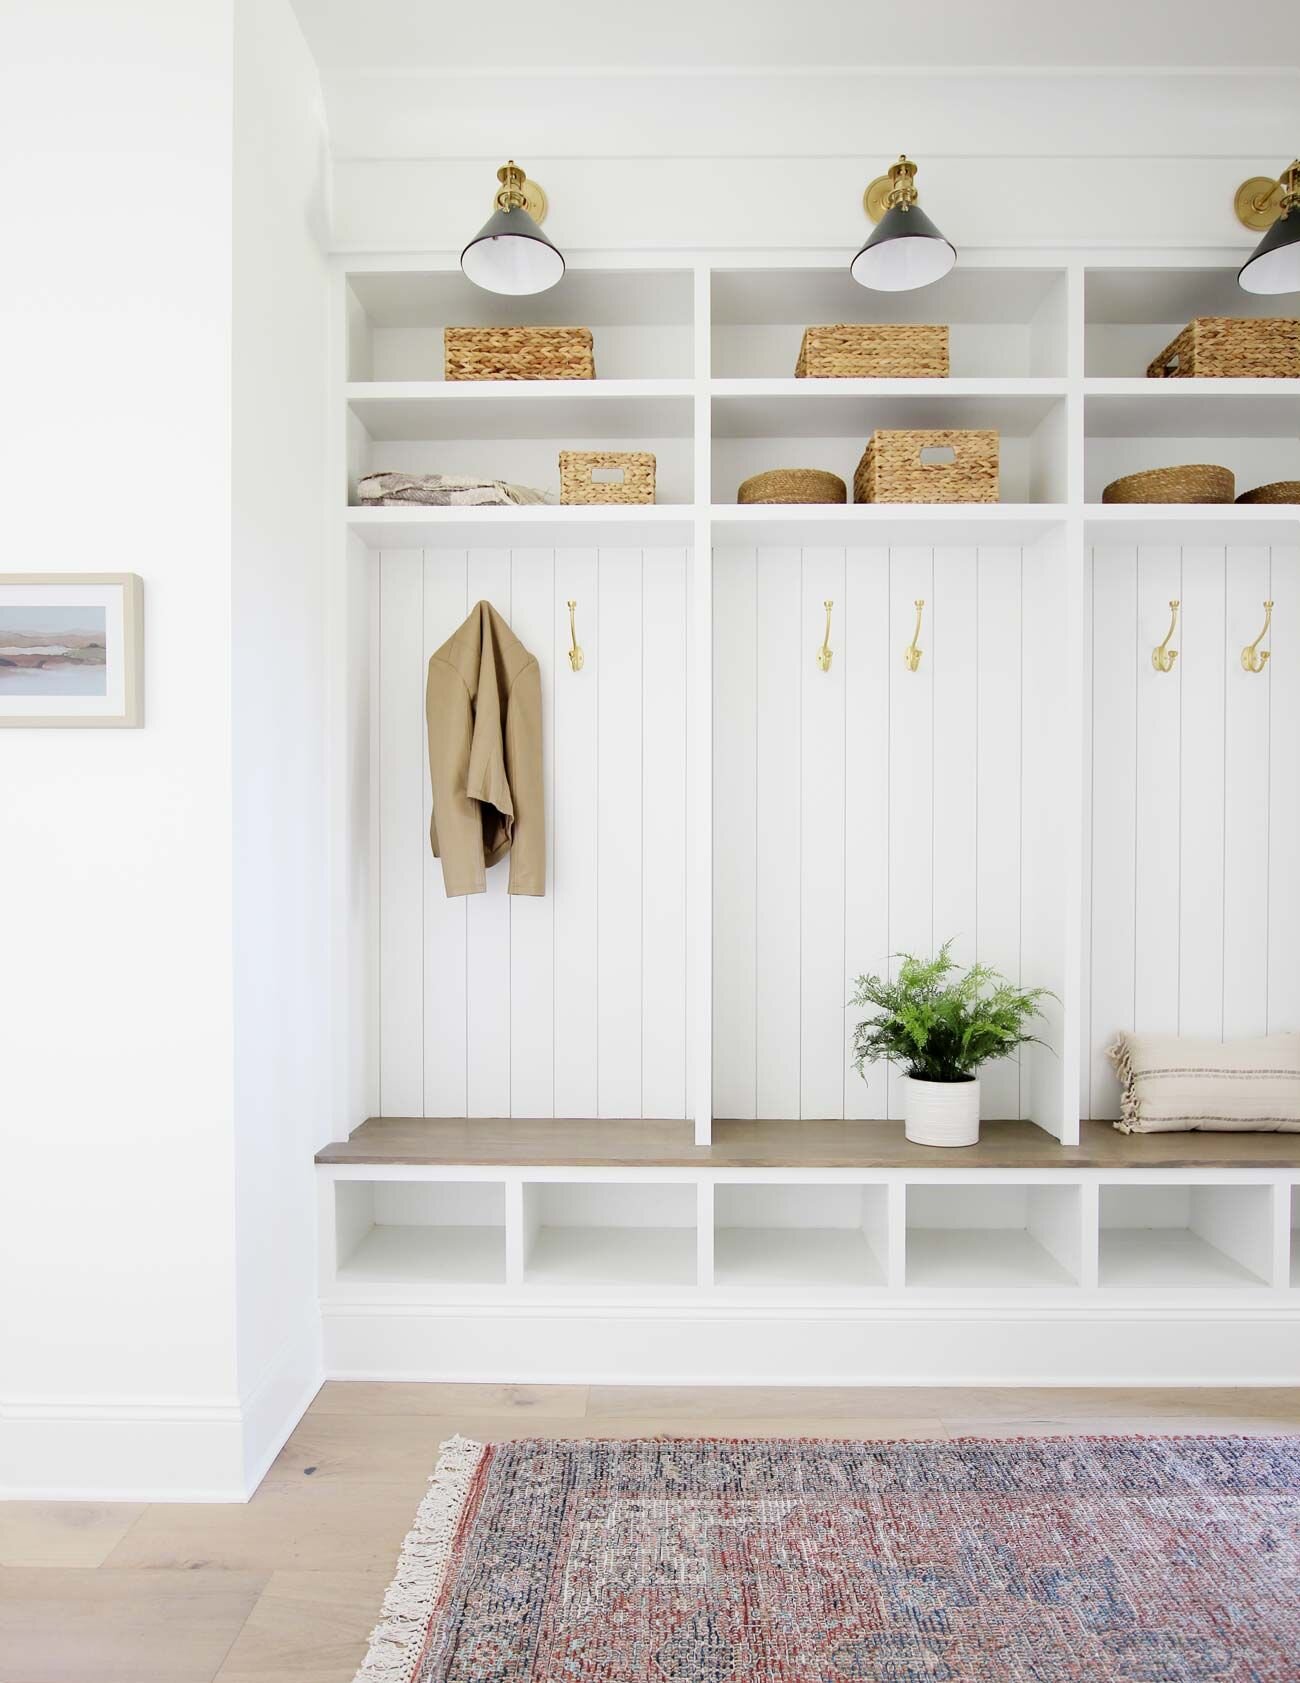 How to Build Mudroom Lockers - Plank and Pillow.jpg